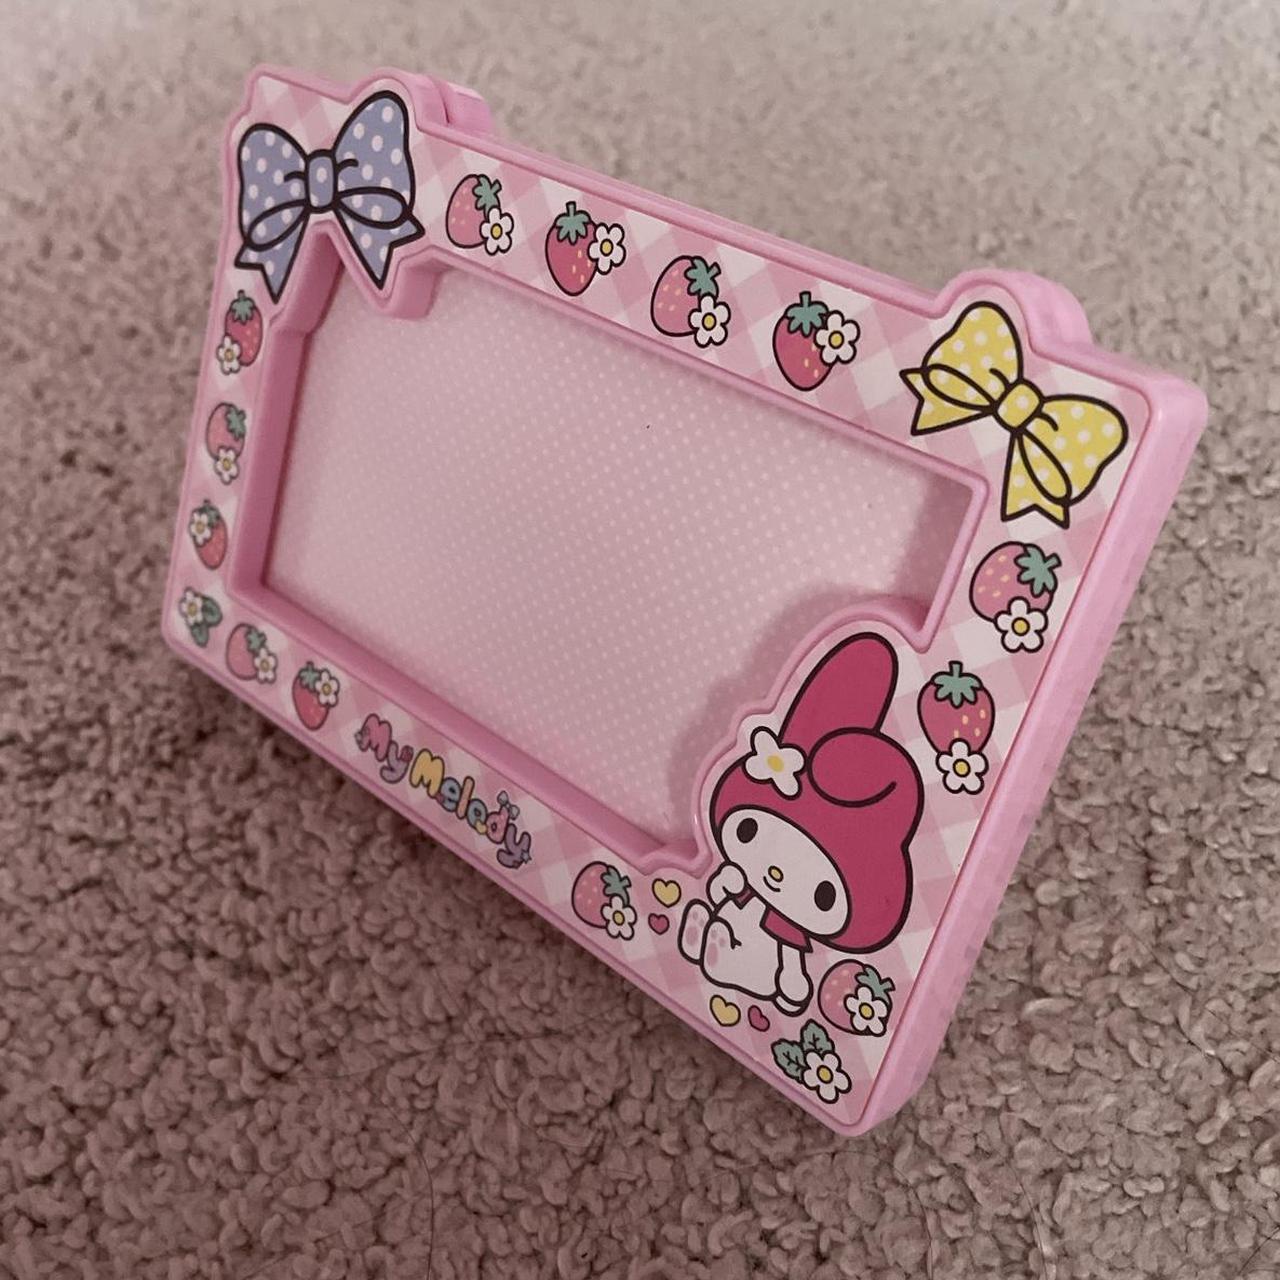 official my melody 2016 photo frame #cutecore... - Depop